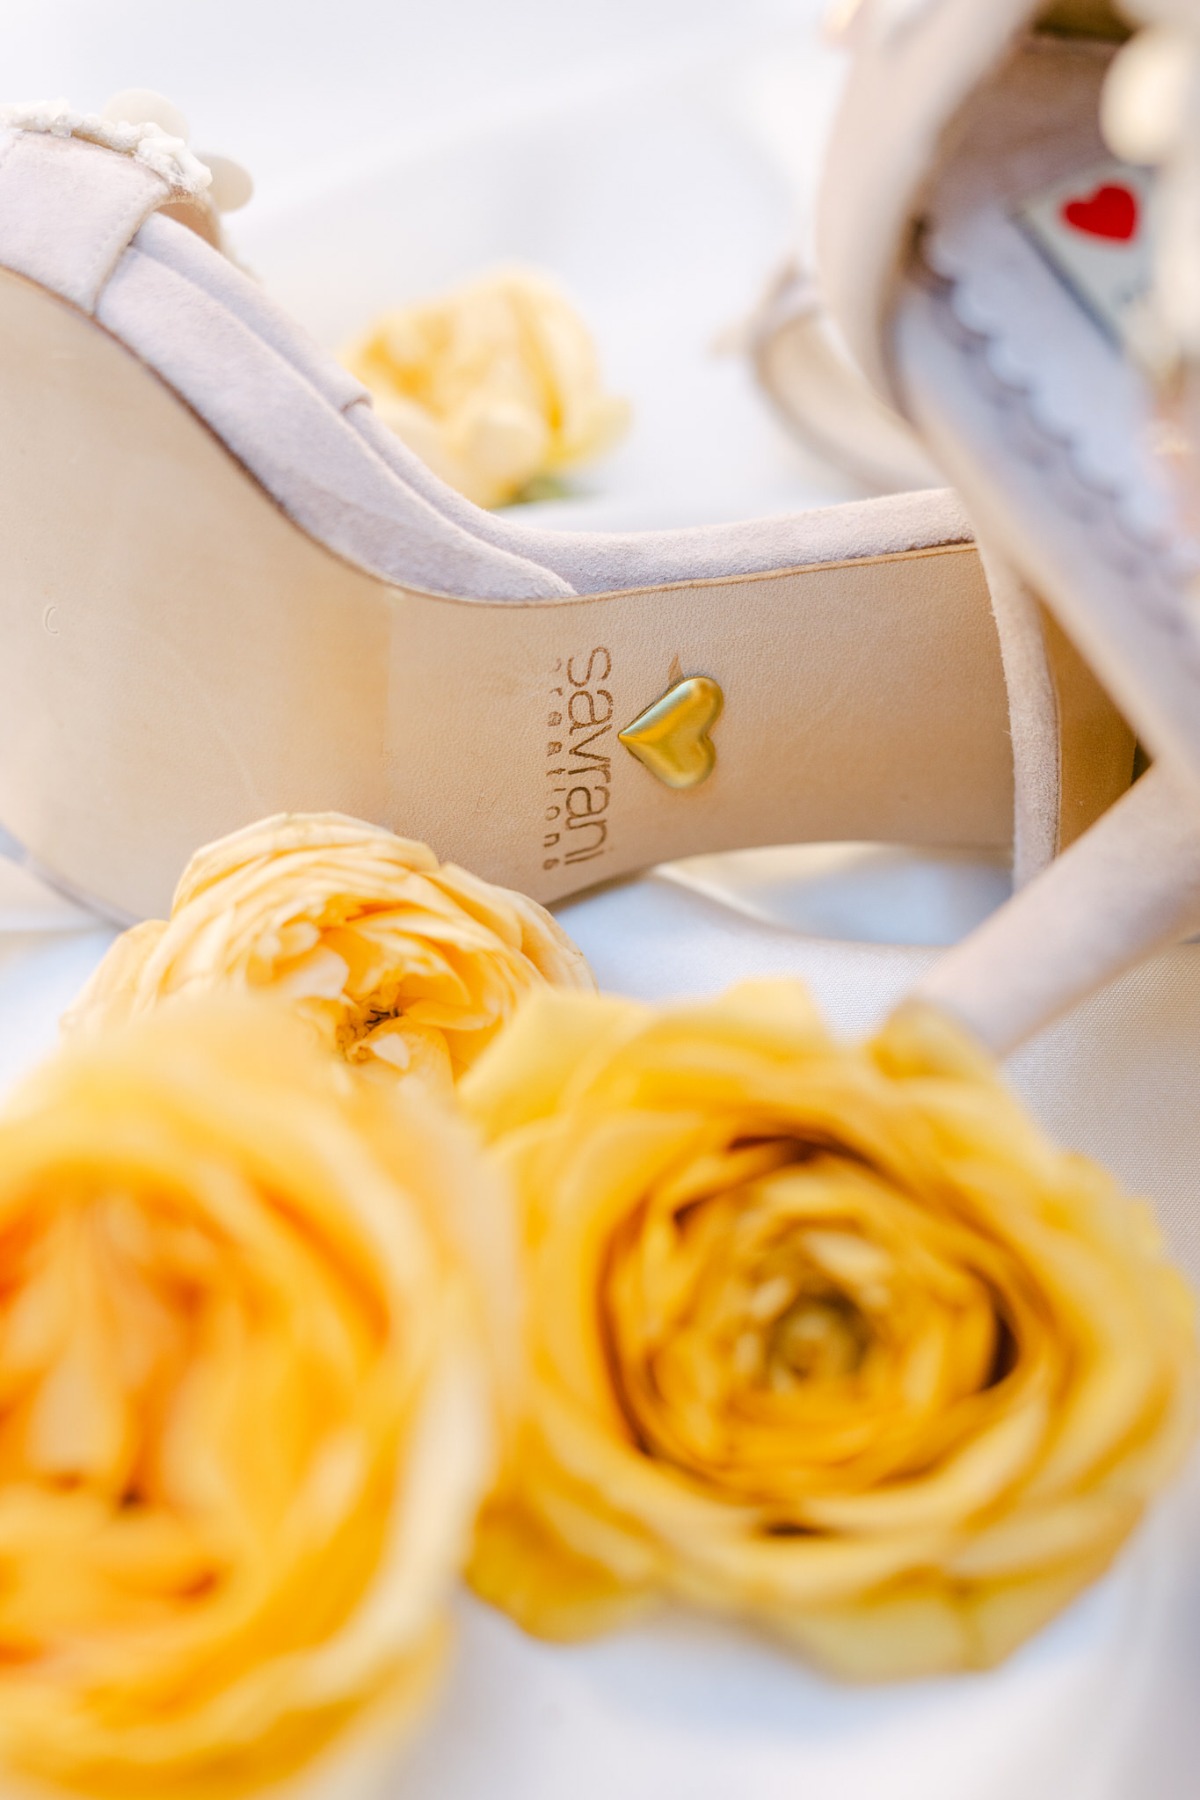 Cute gold heart emblem for bottom of wedding shoes 